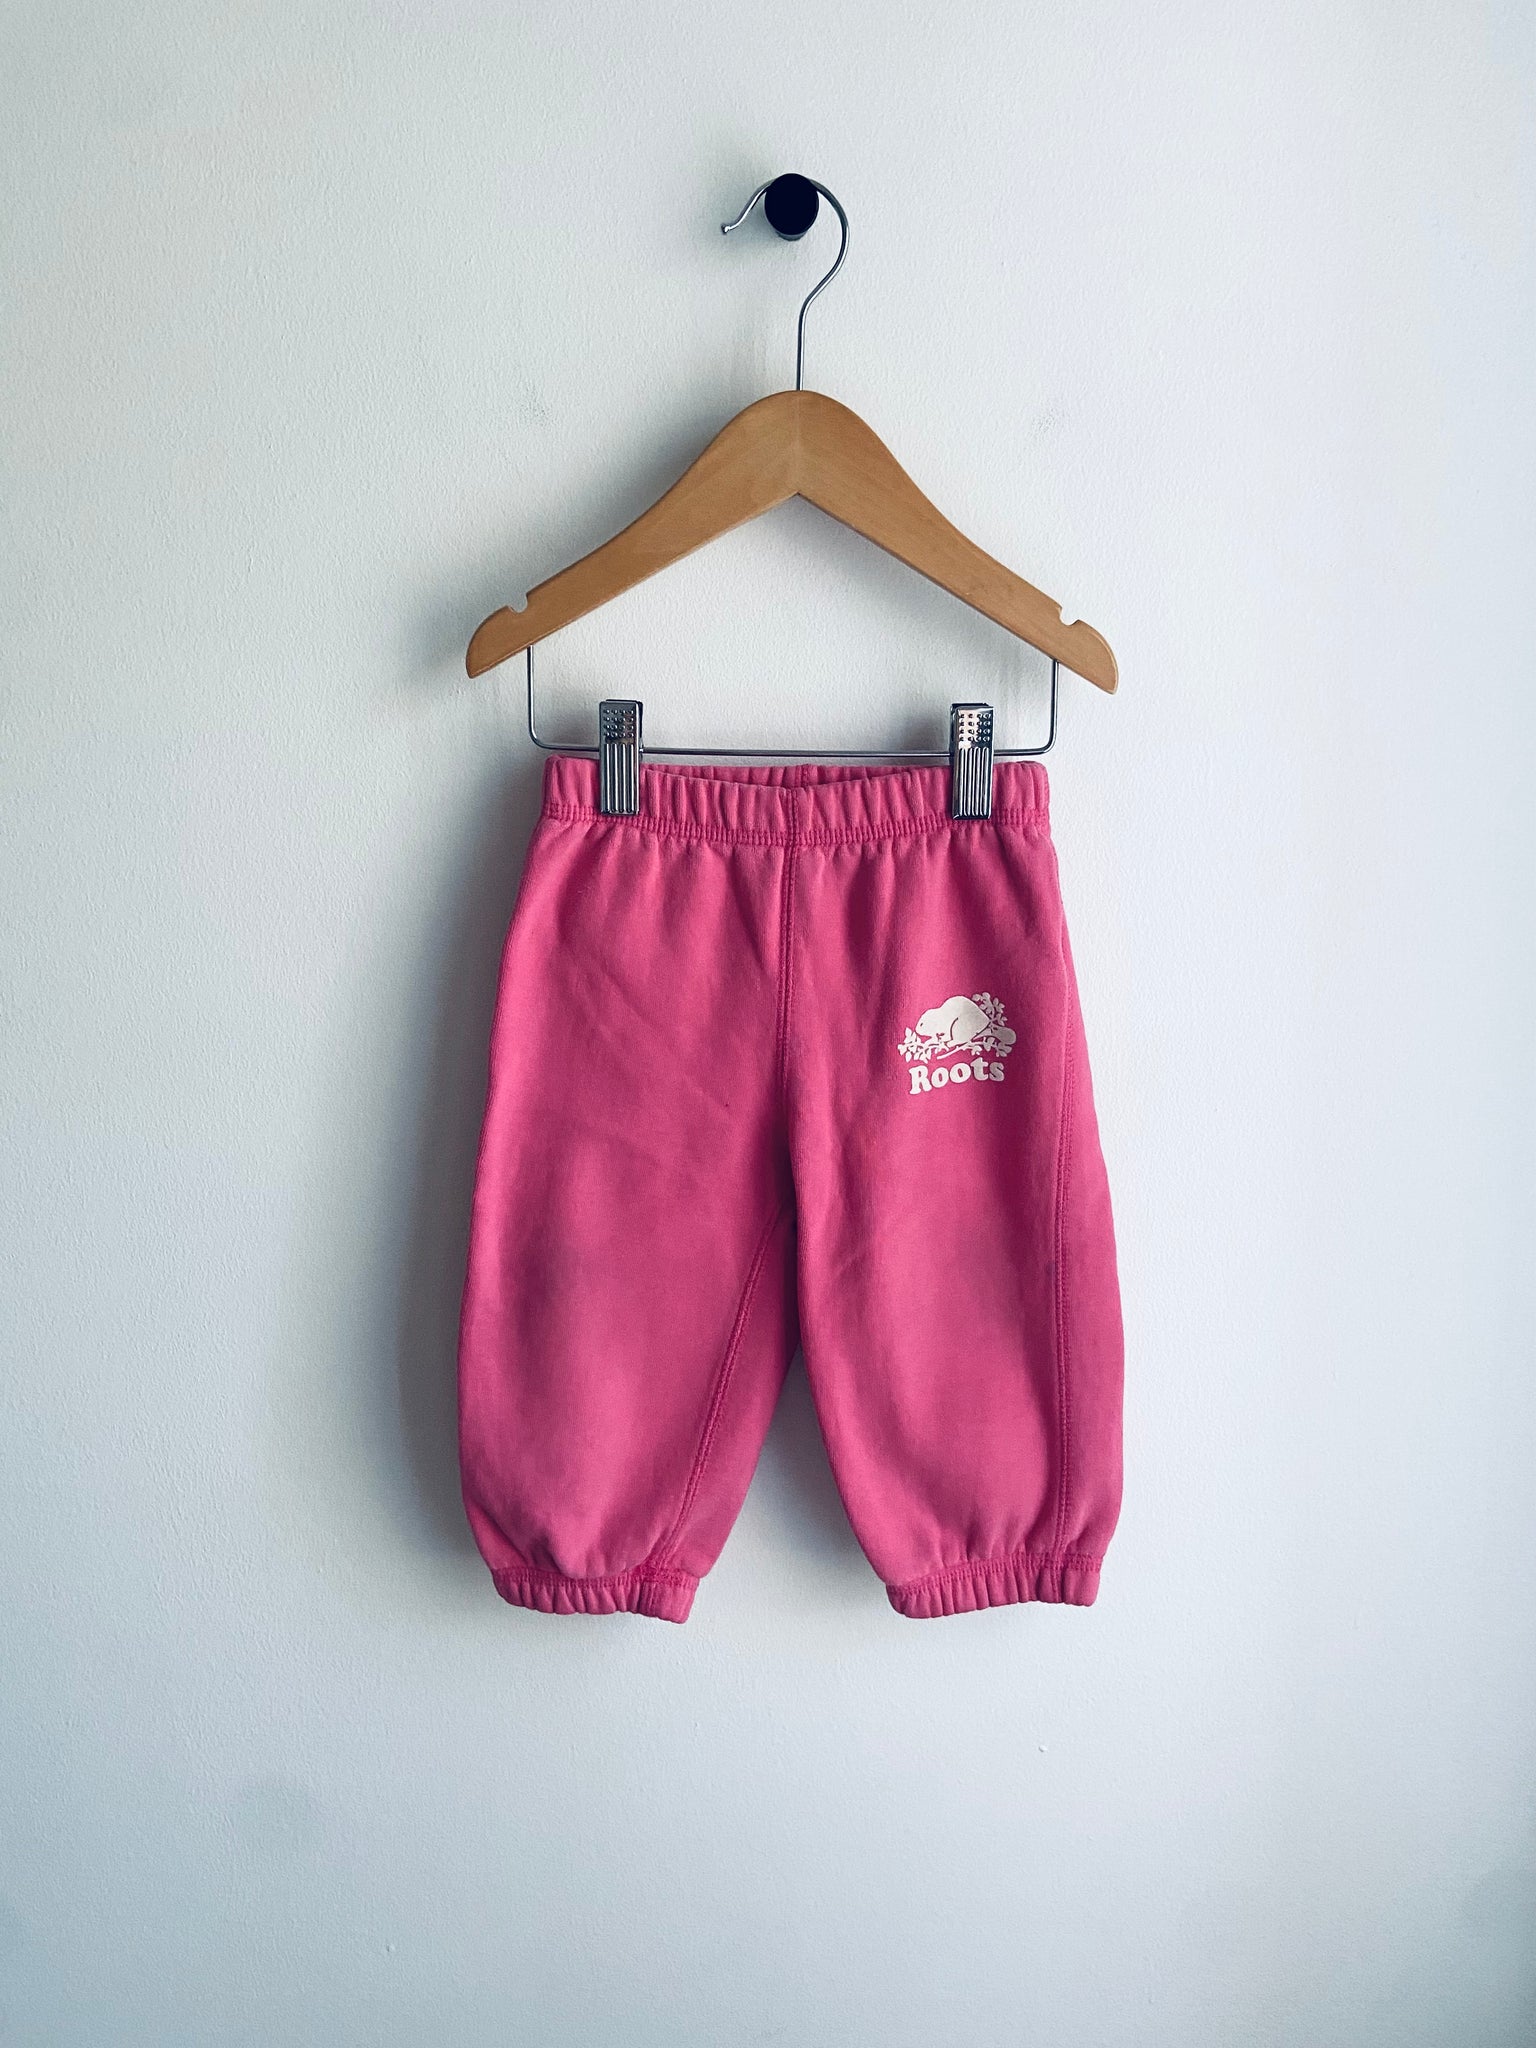 Women's Red and Pinks Sweatpants - Roots